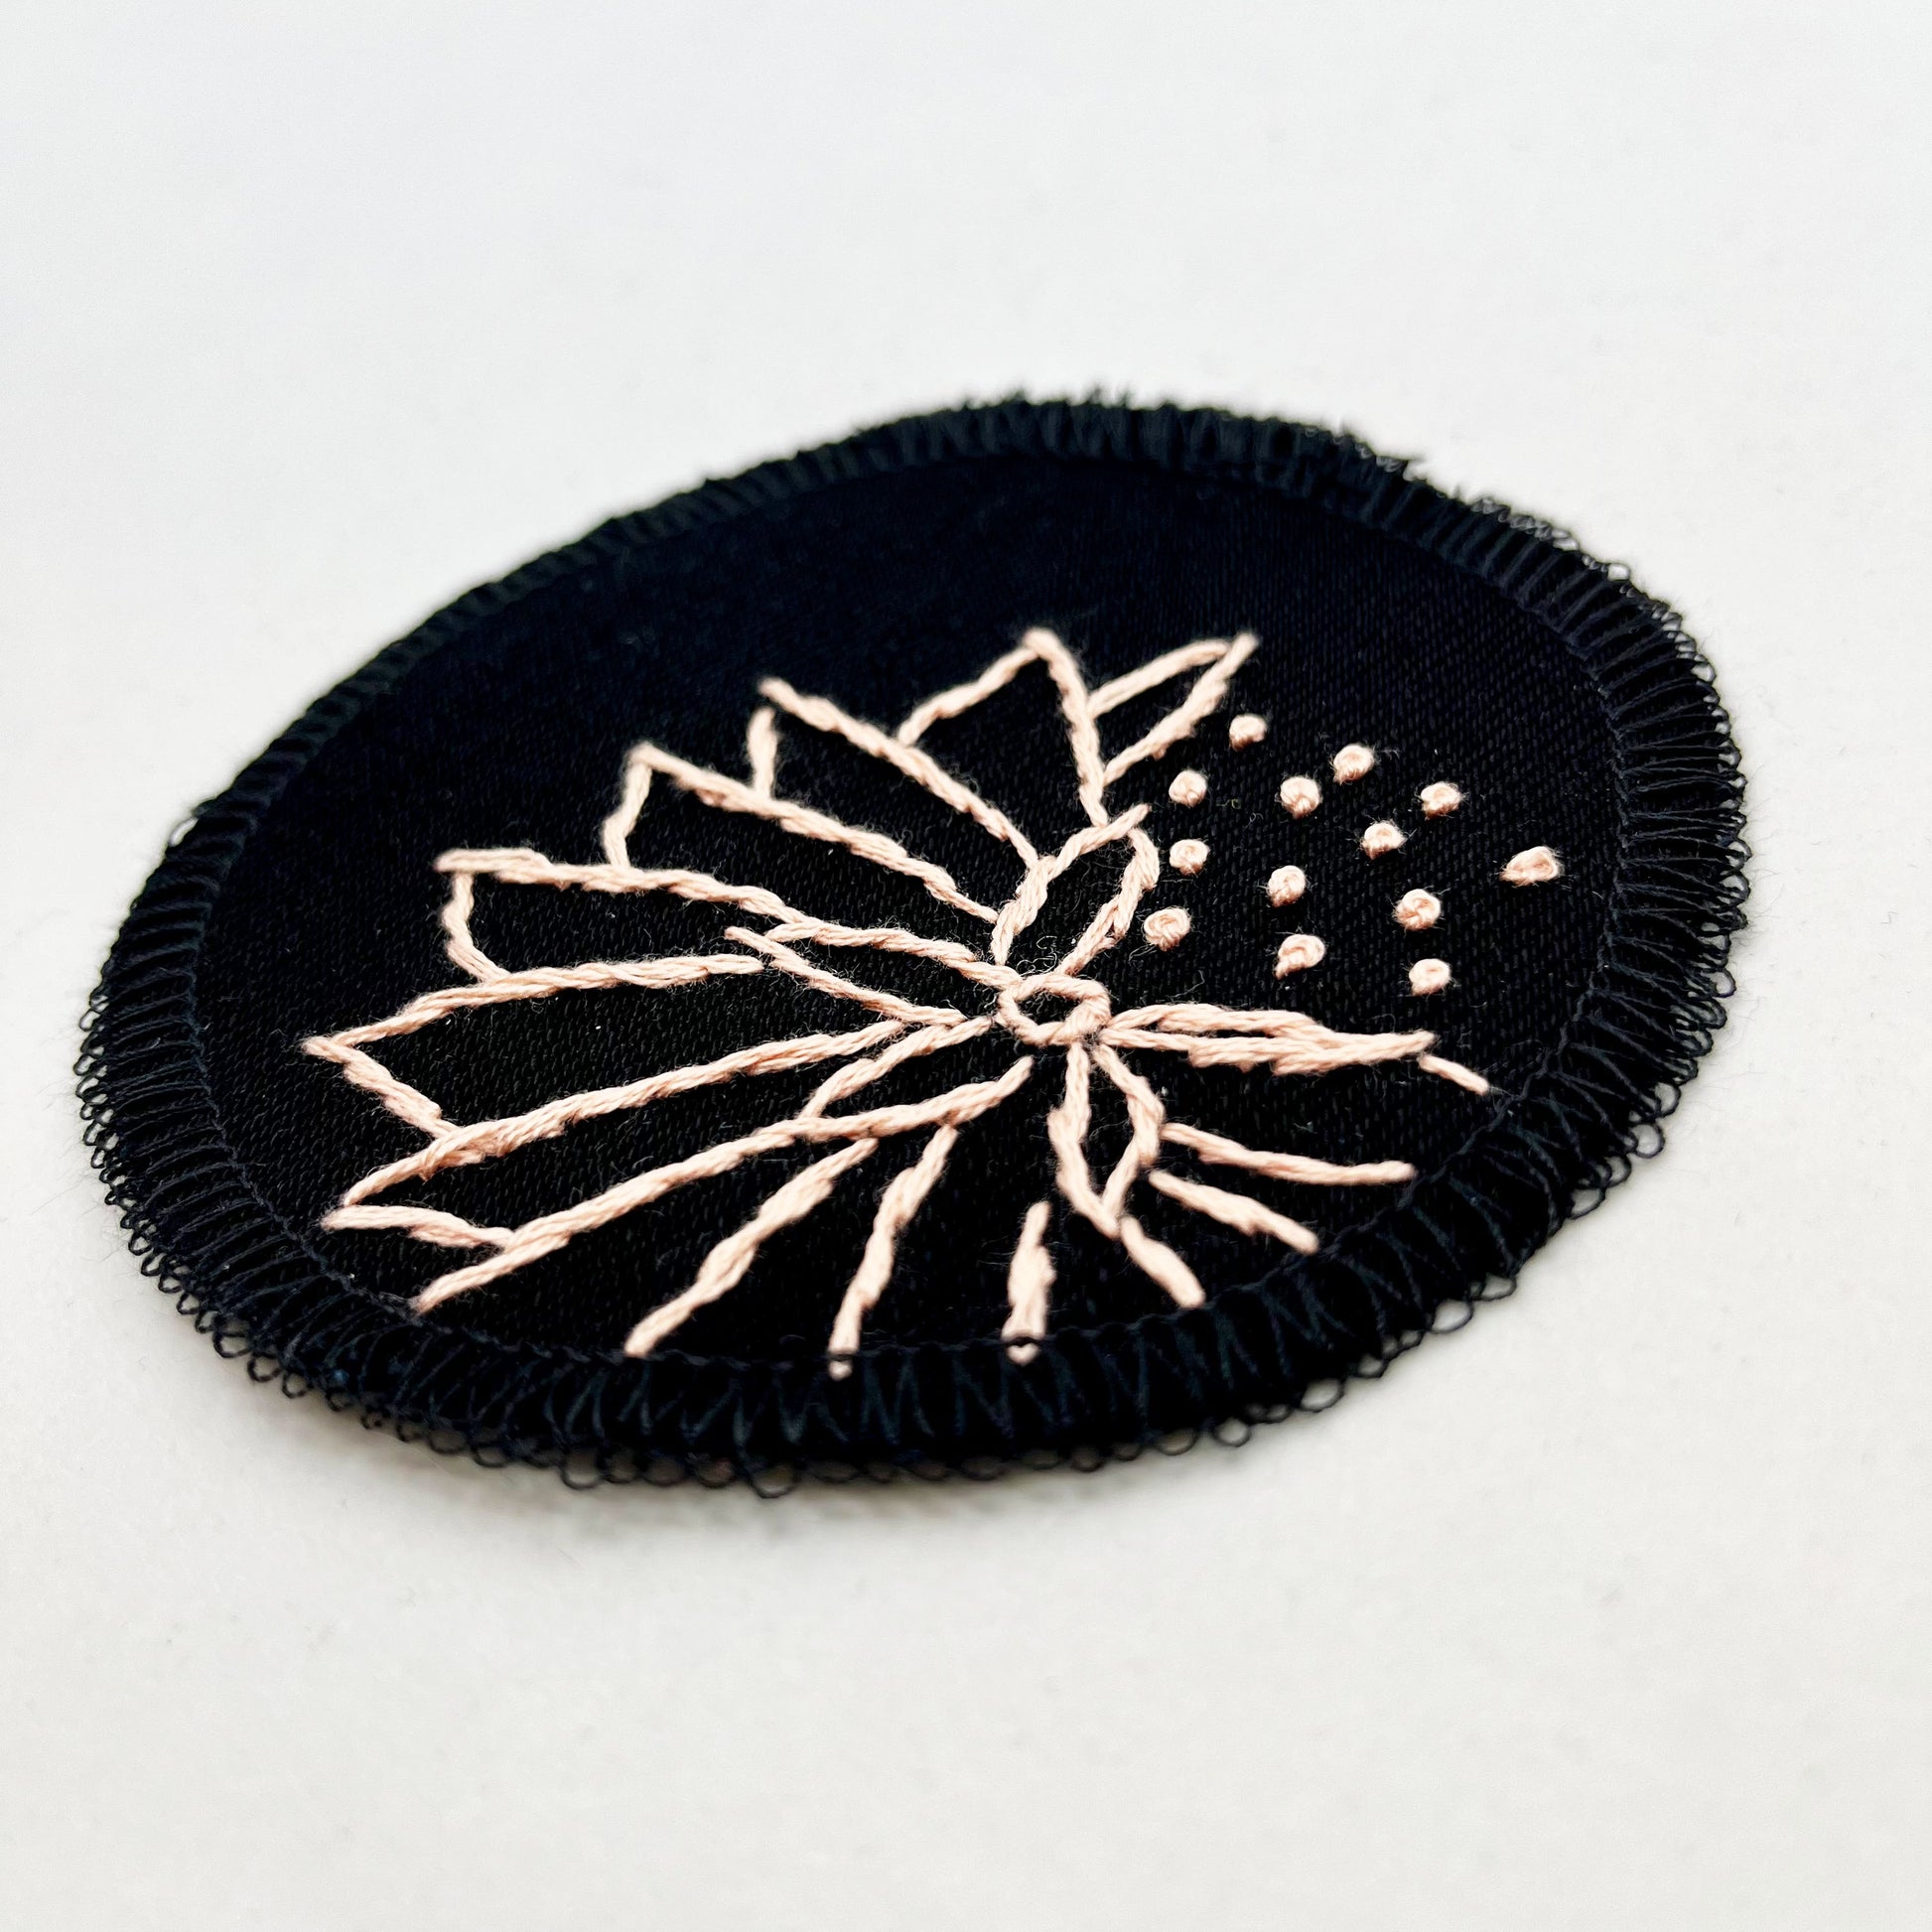 a circle shaped patch made out of black twill weave fabric, hand embroidered with an abstract dandelion in peach colored floss, outlines of petals, edges overlocked in black, on a white background